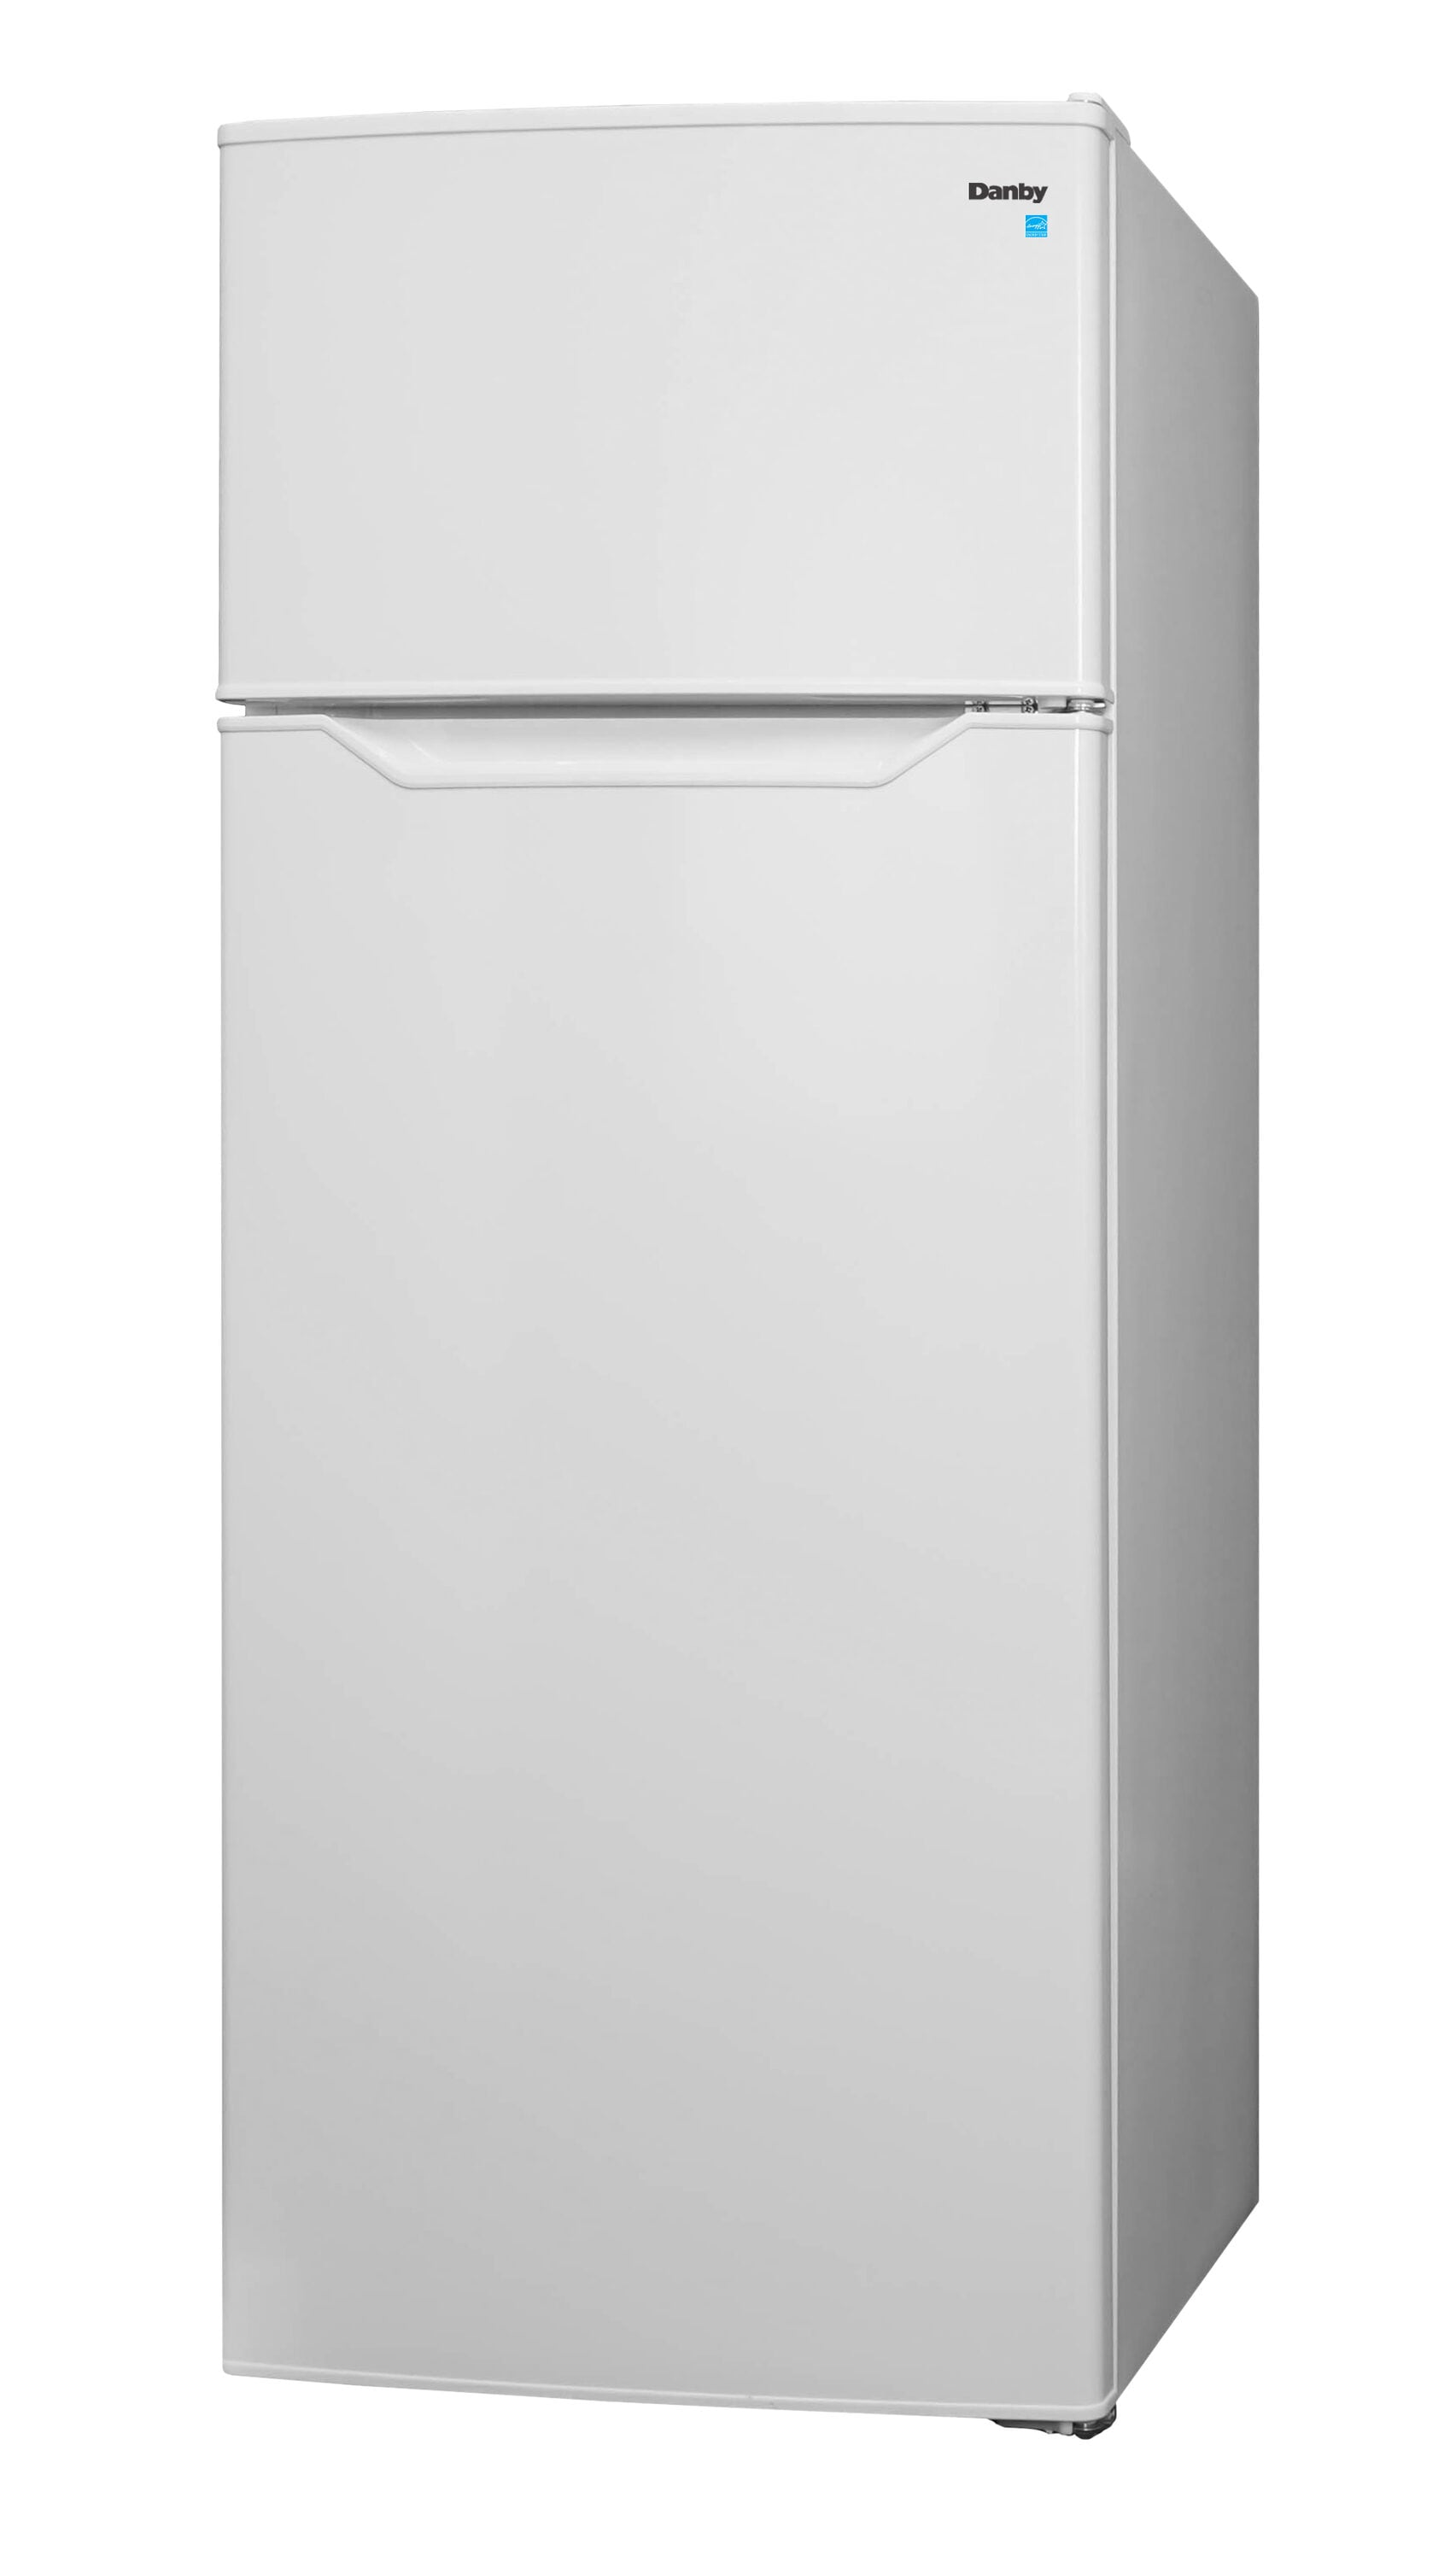 Danby 18.1 cu. ft. Apartment Size Fridge Top Mount in Stainless